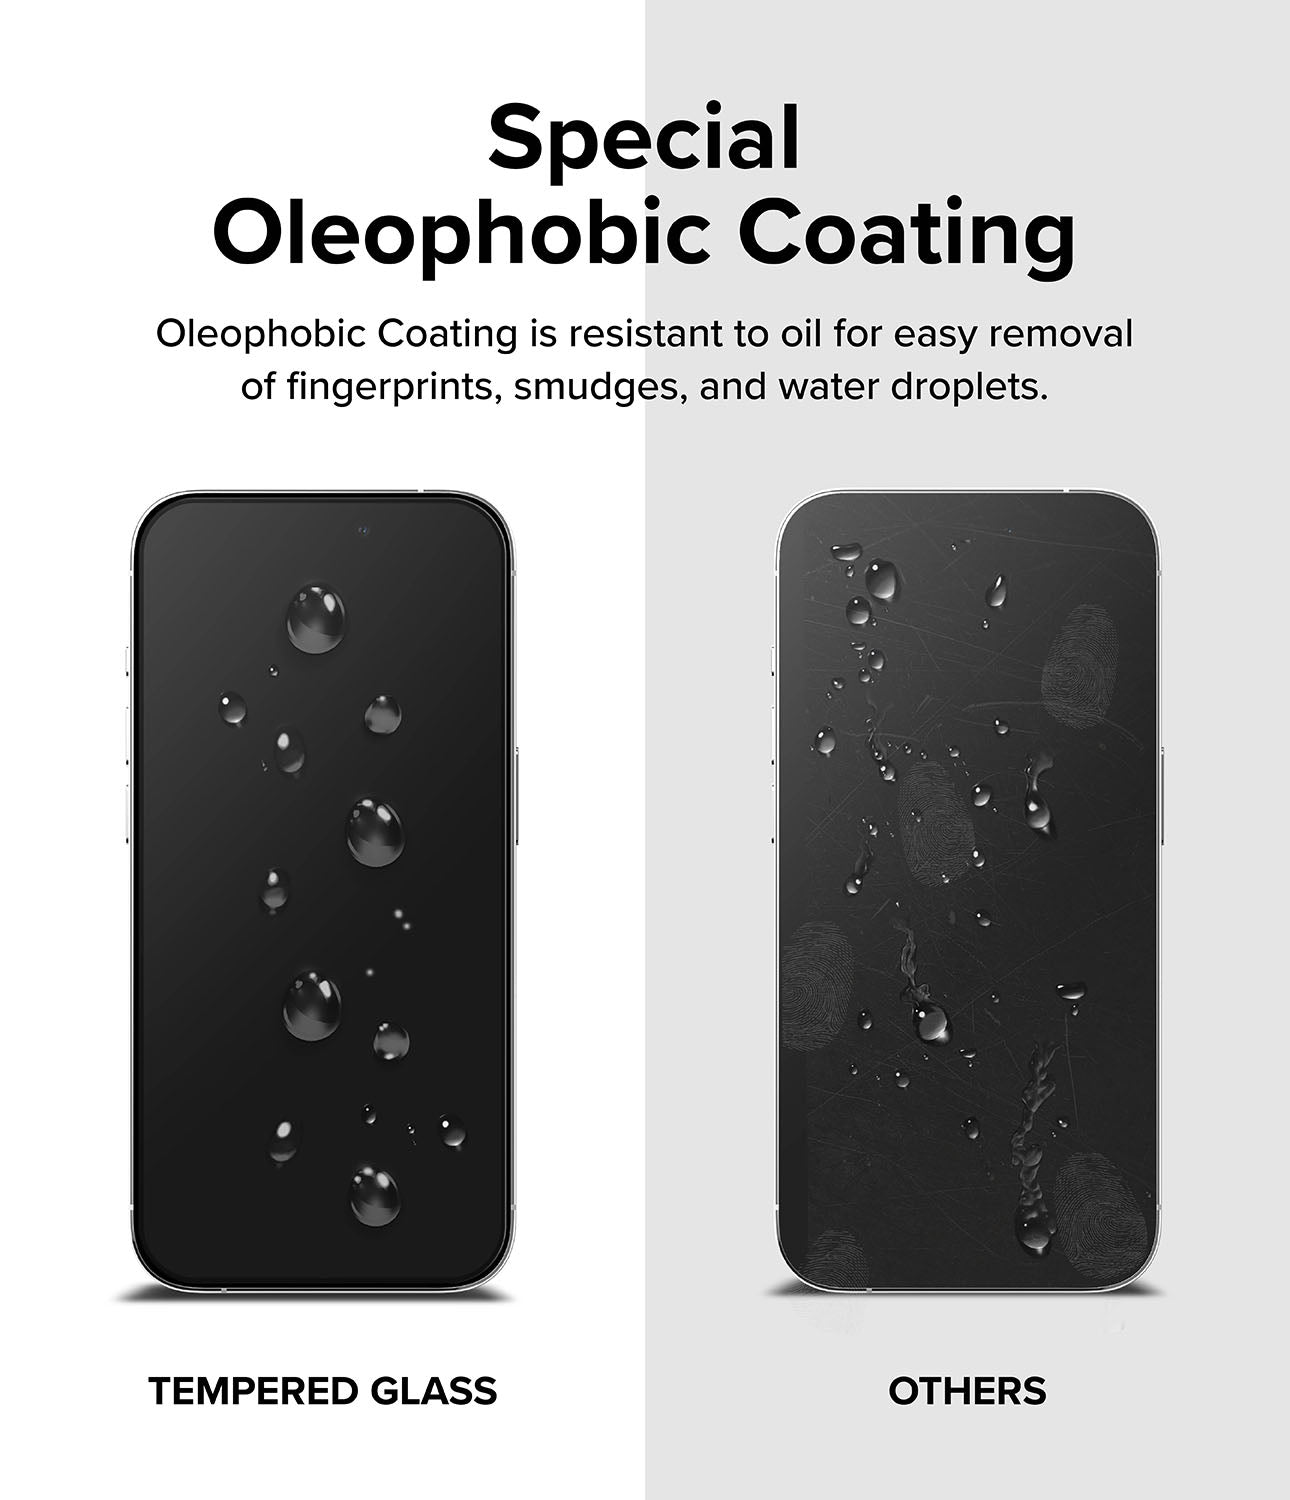 iPhone 15 Pro Screen Protector | Full Cover Glass - Special Oleophobic Coating. Oleophobic Coating is resistant to oil for easy removal of fingerprints, smudges, and water droplets.